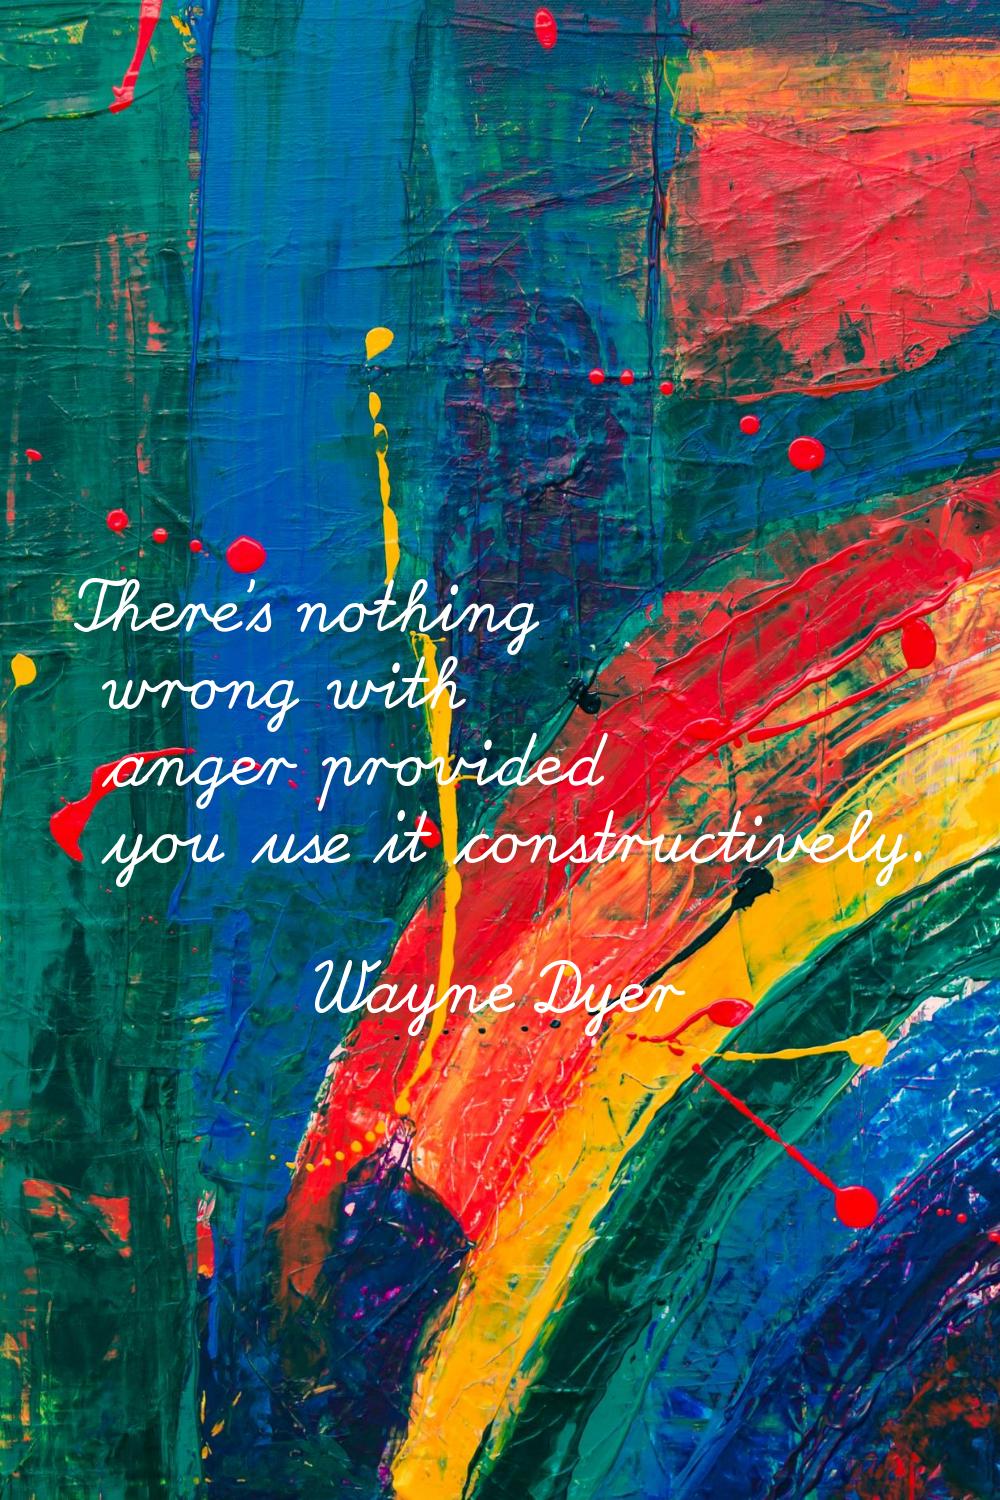 There's nothing wrong with anger provided you use it constructively.